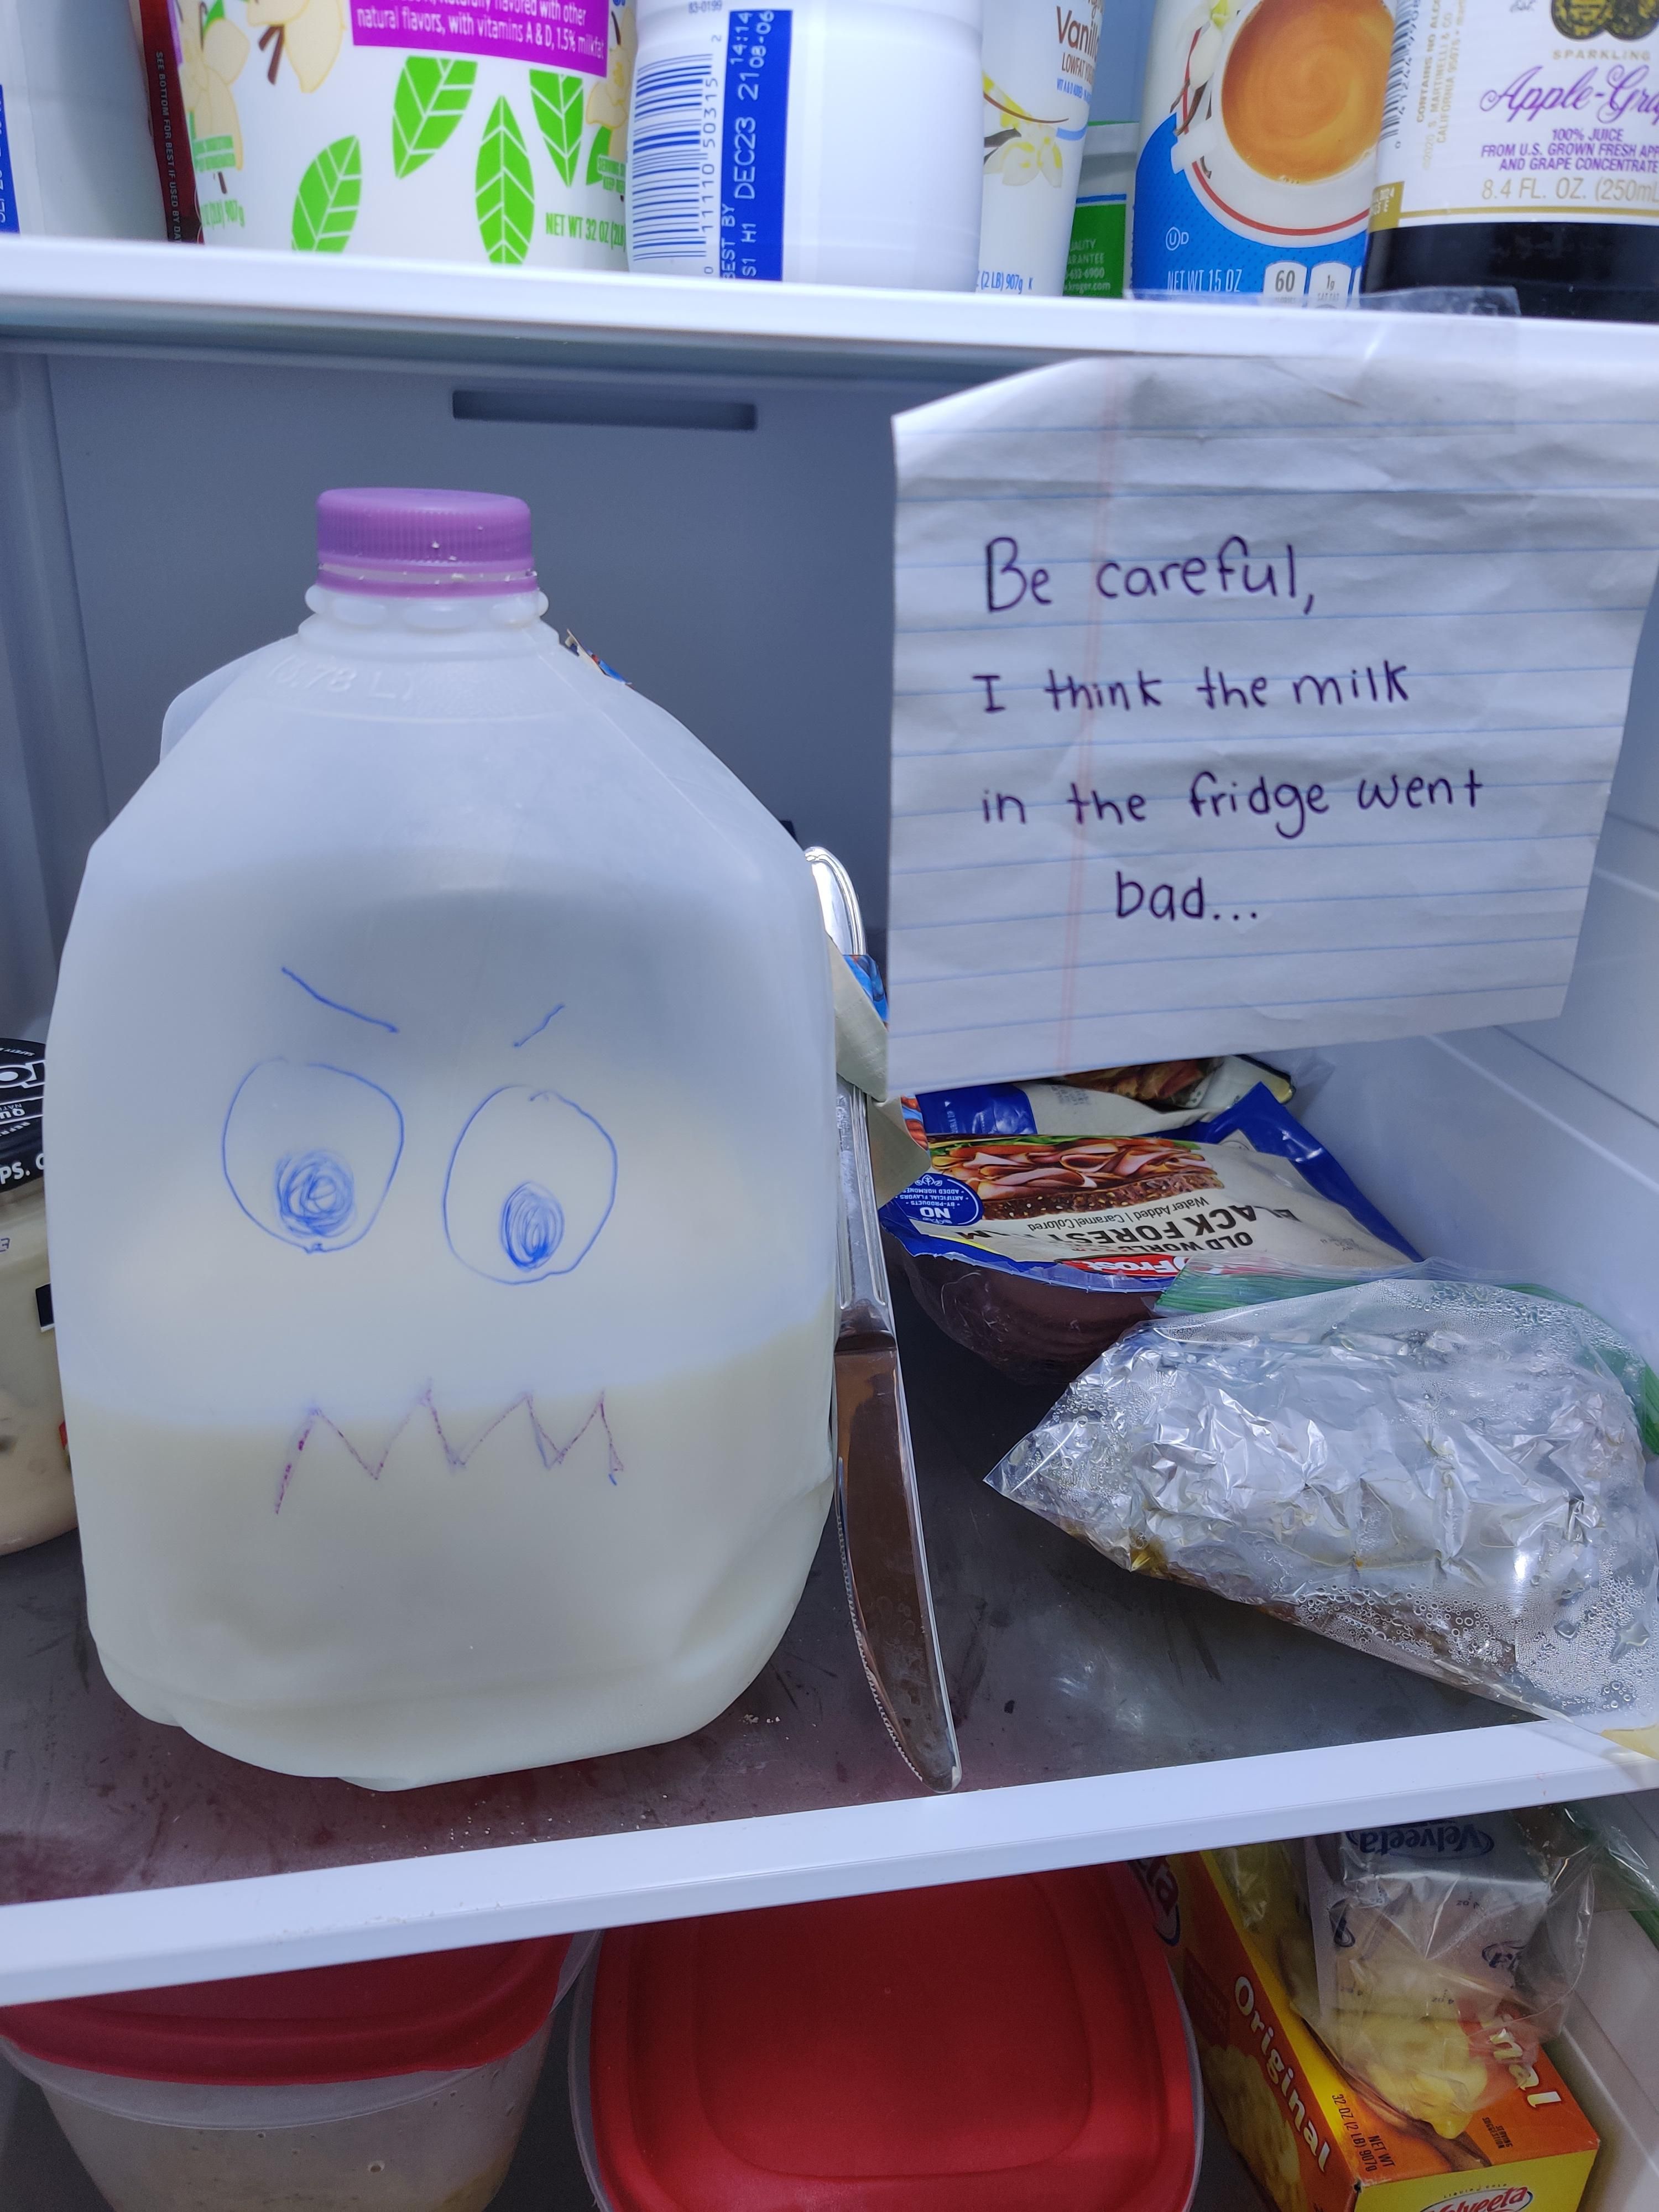 My kid left a note for me in the fridge